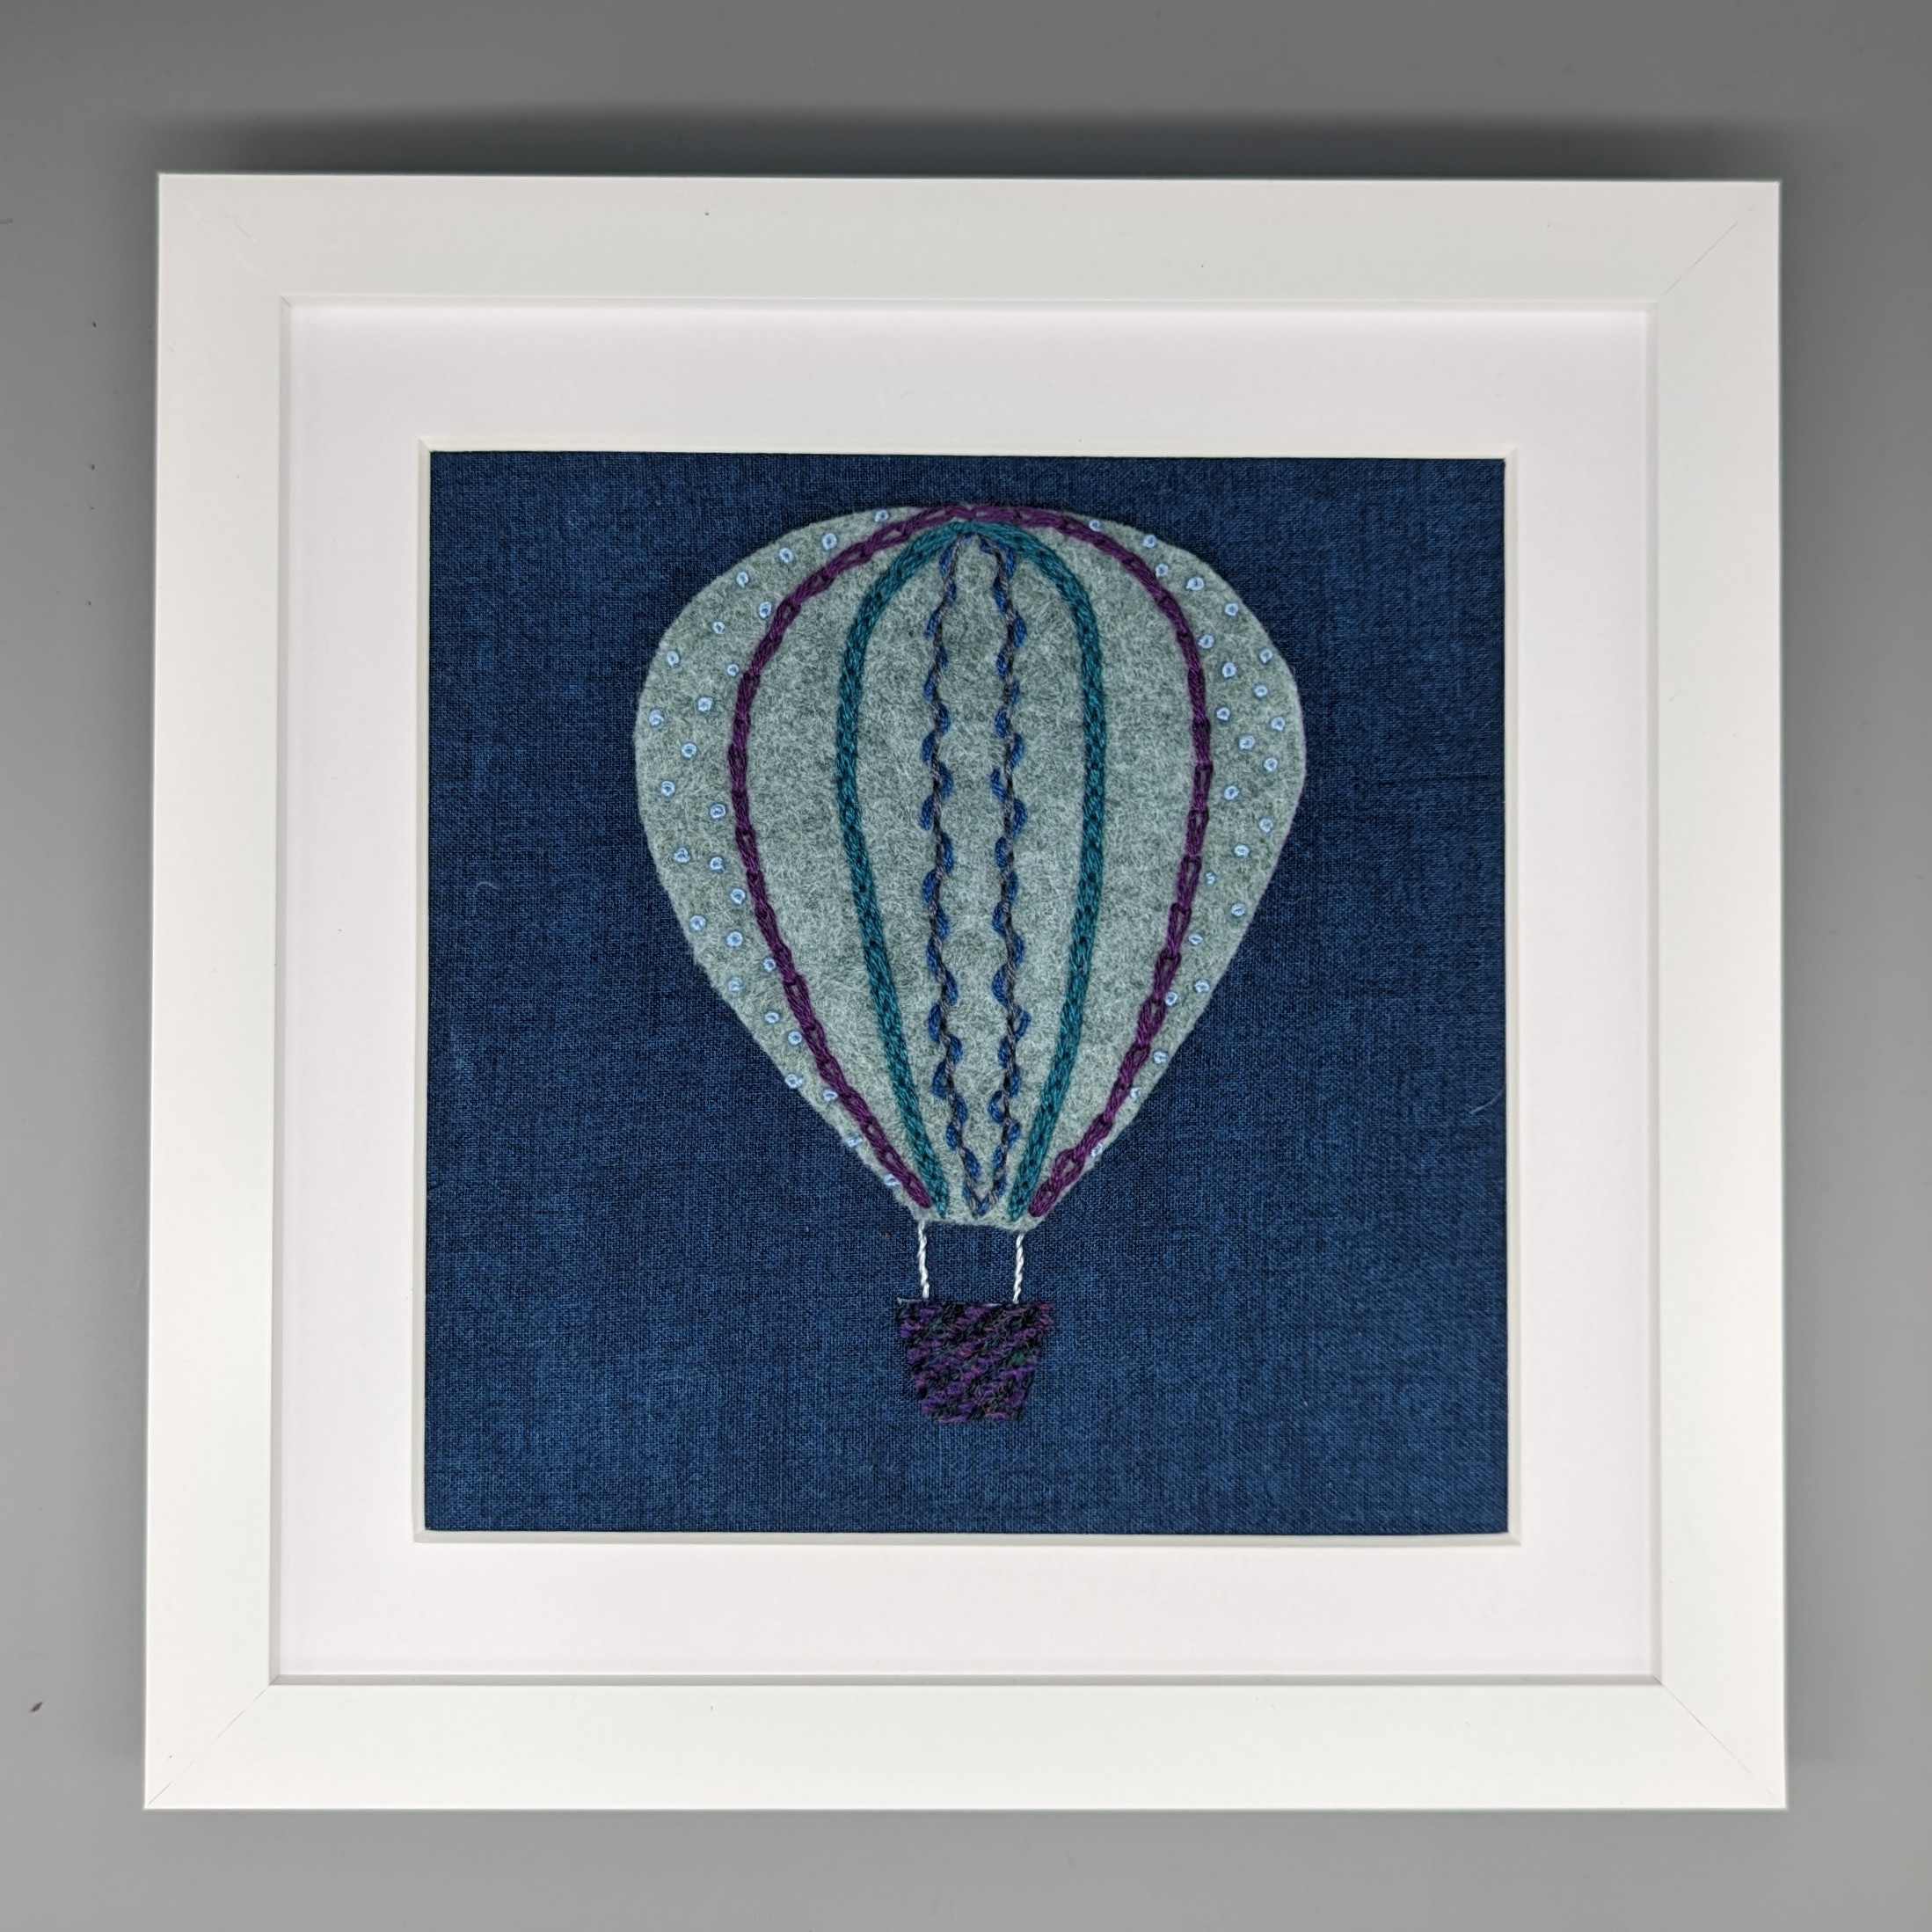 Featured image for “Hand Embroidered Mixed Textile Hot Air Balloon”